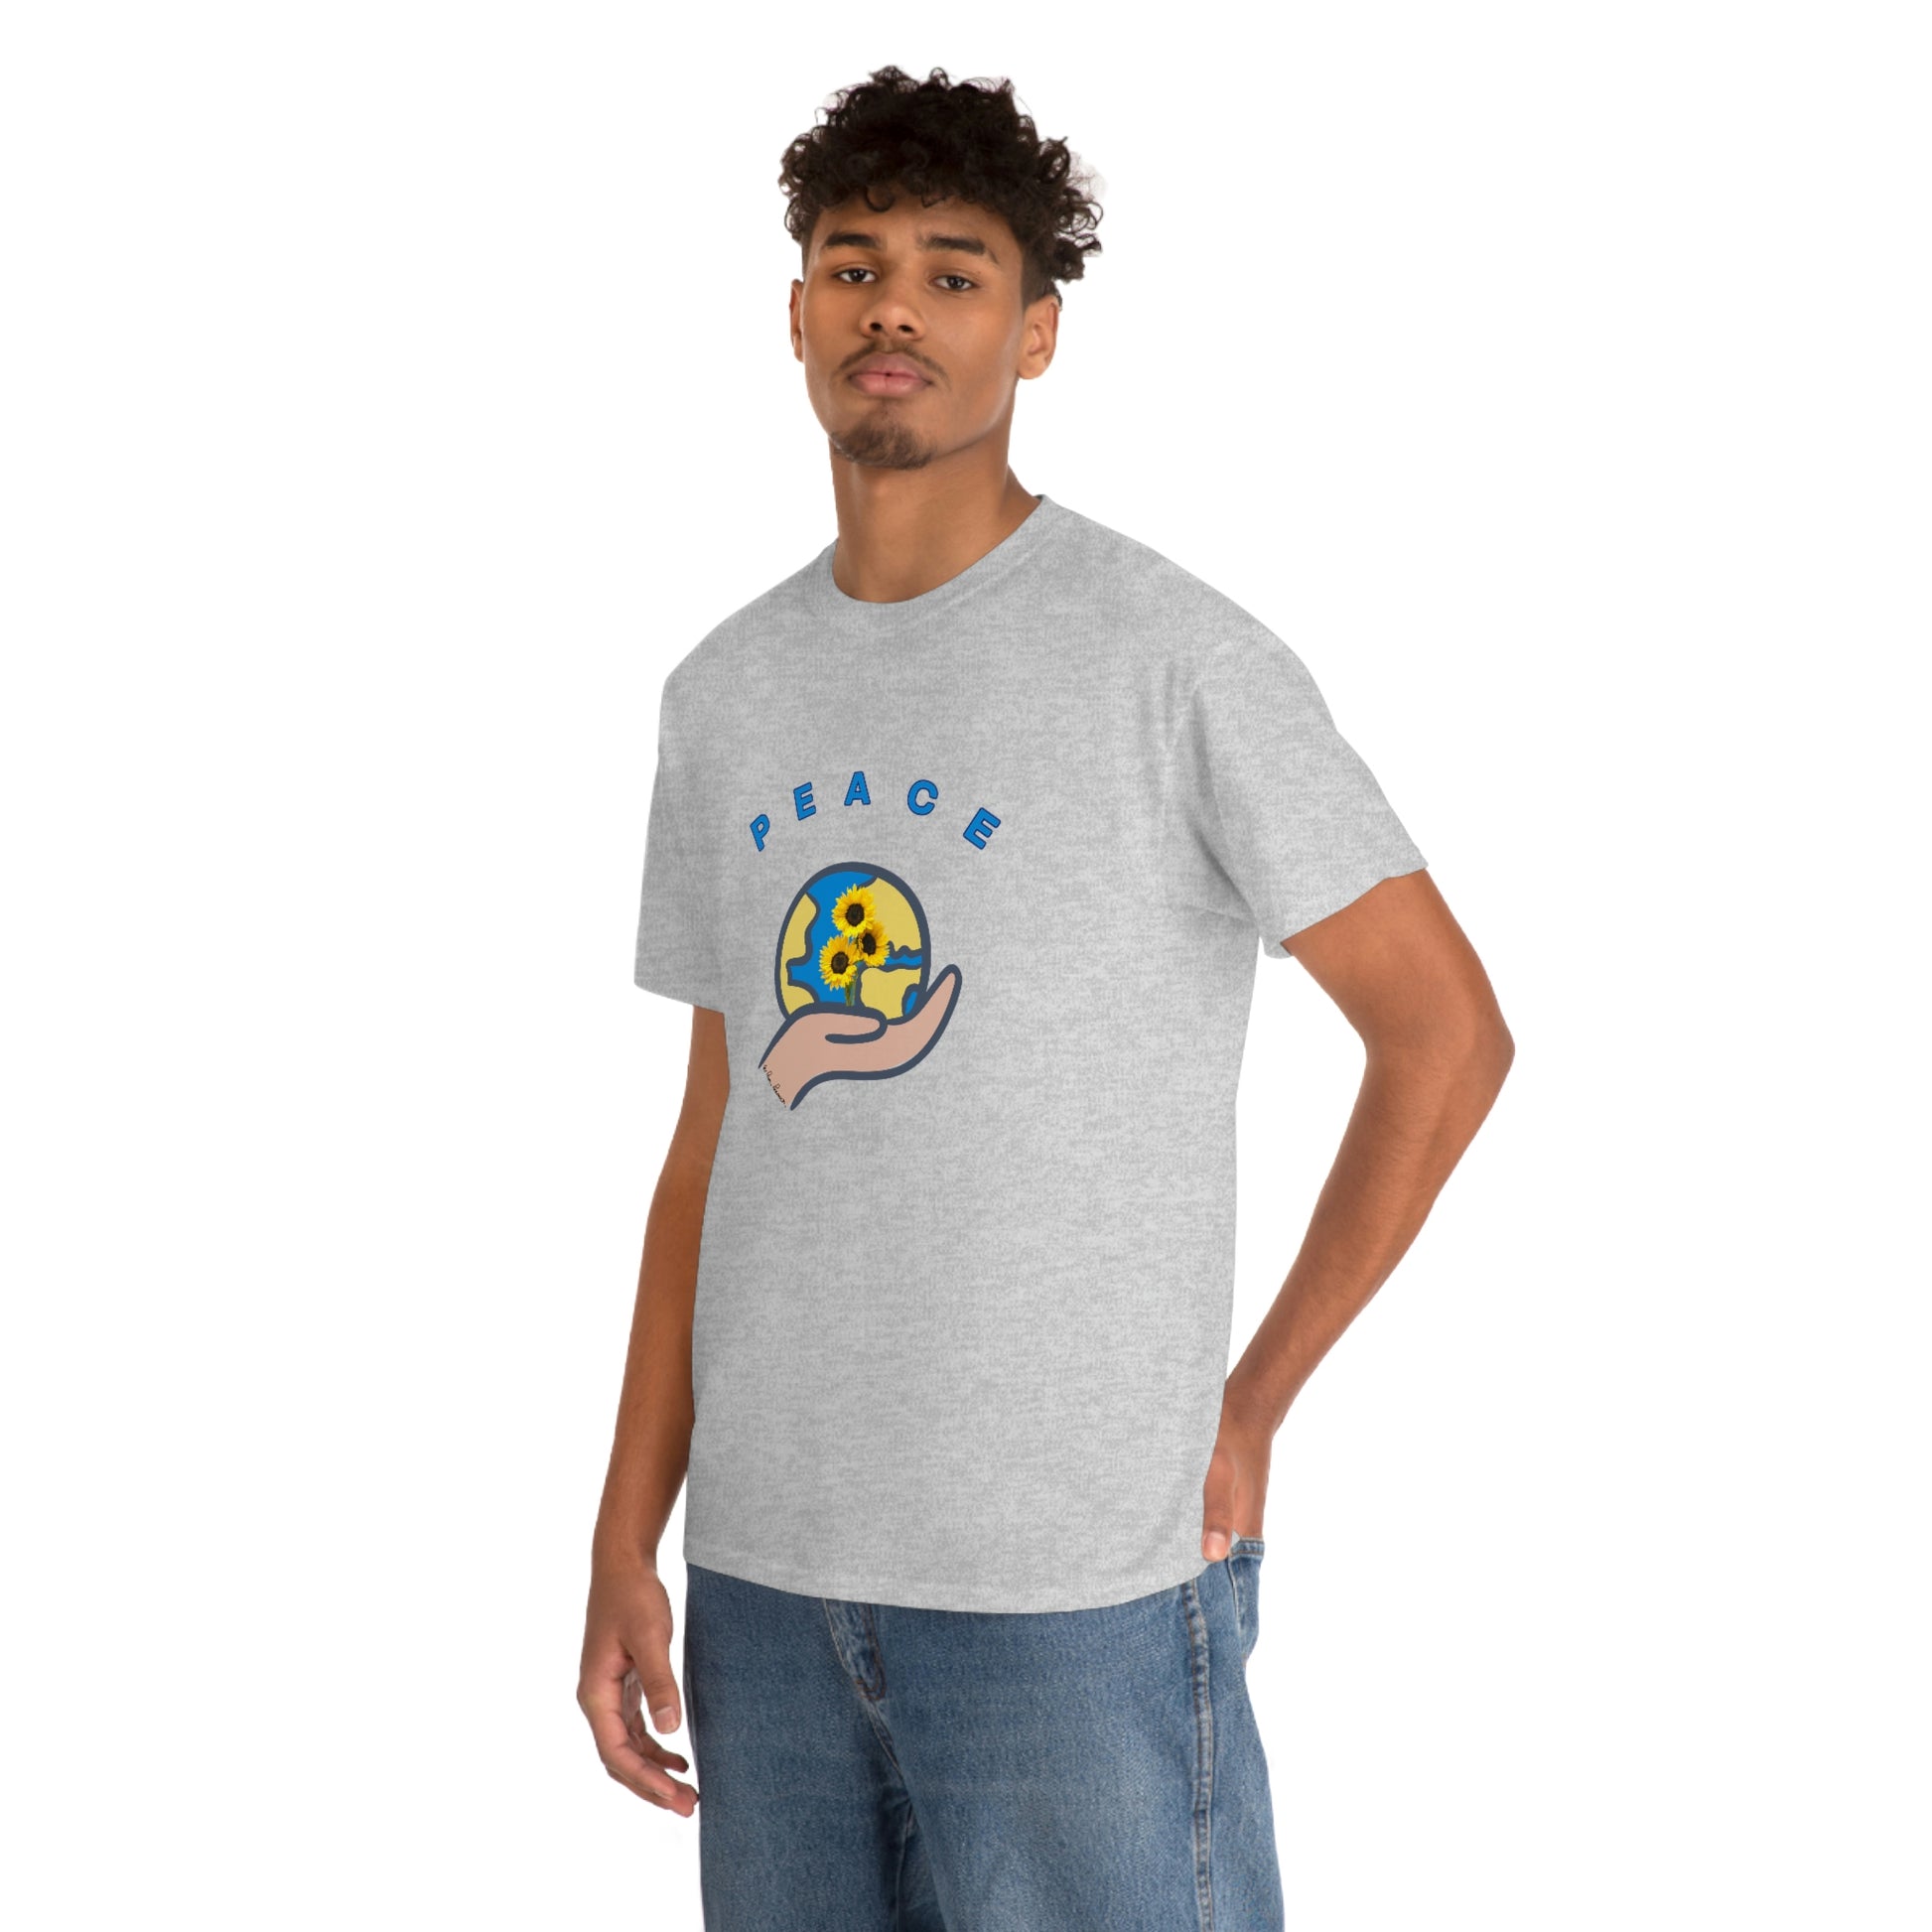 Mock up of the gray t-shirt as worn by a slim man with facial hair